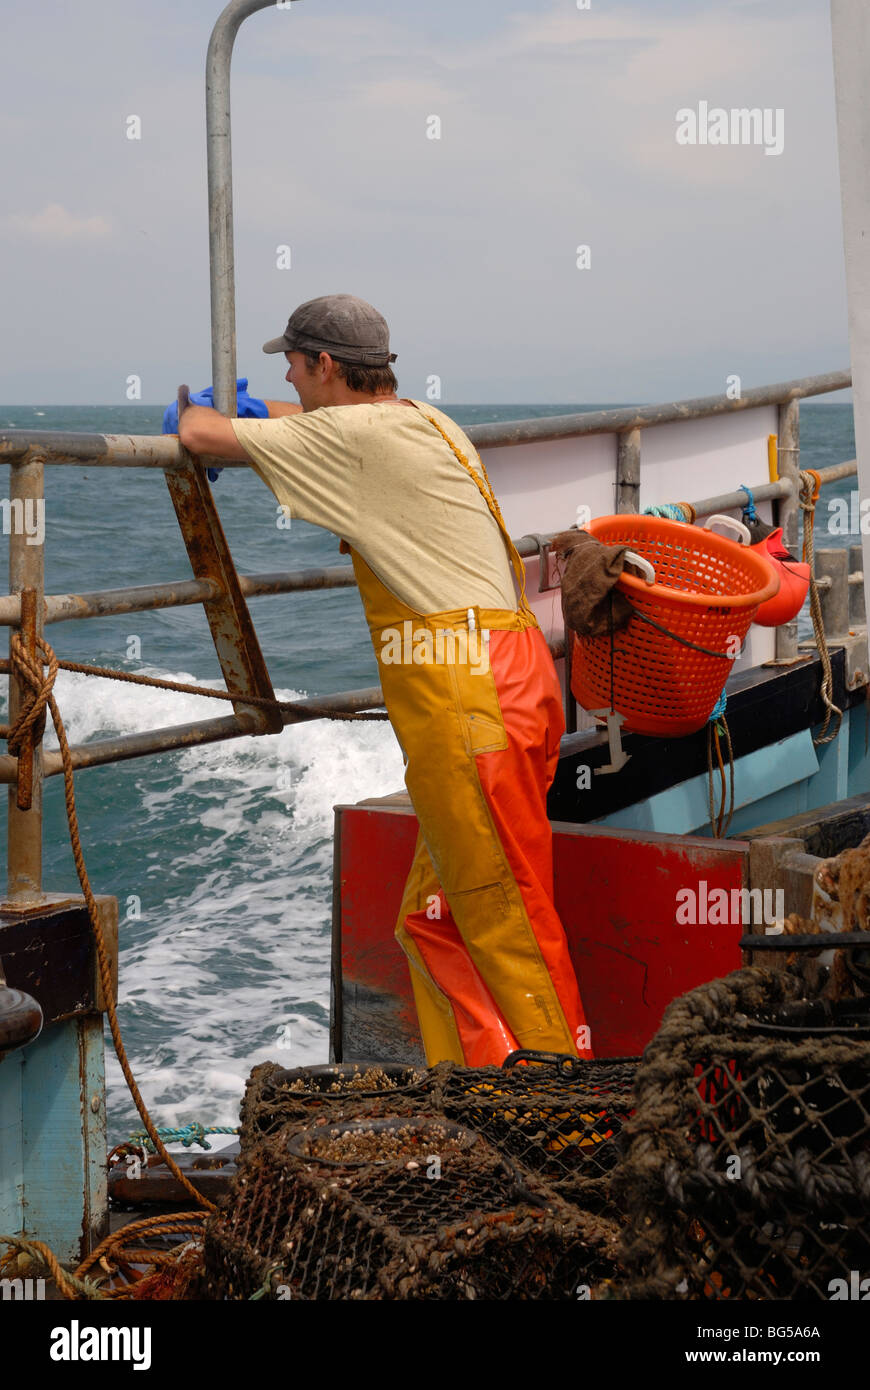 Fisherman aboard a Lobster fishing boat, waiting to 'shoot' the pots, Cardigan Bay, Wales. Stock Photo